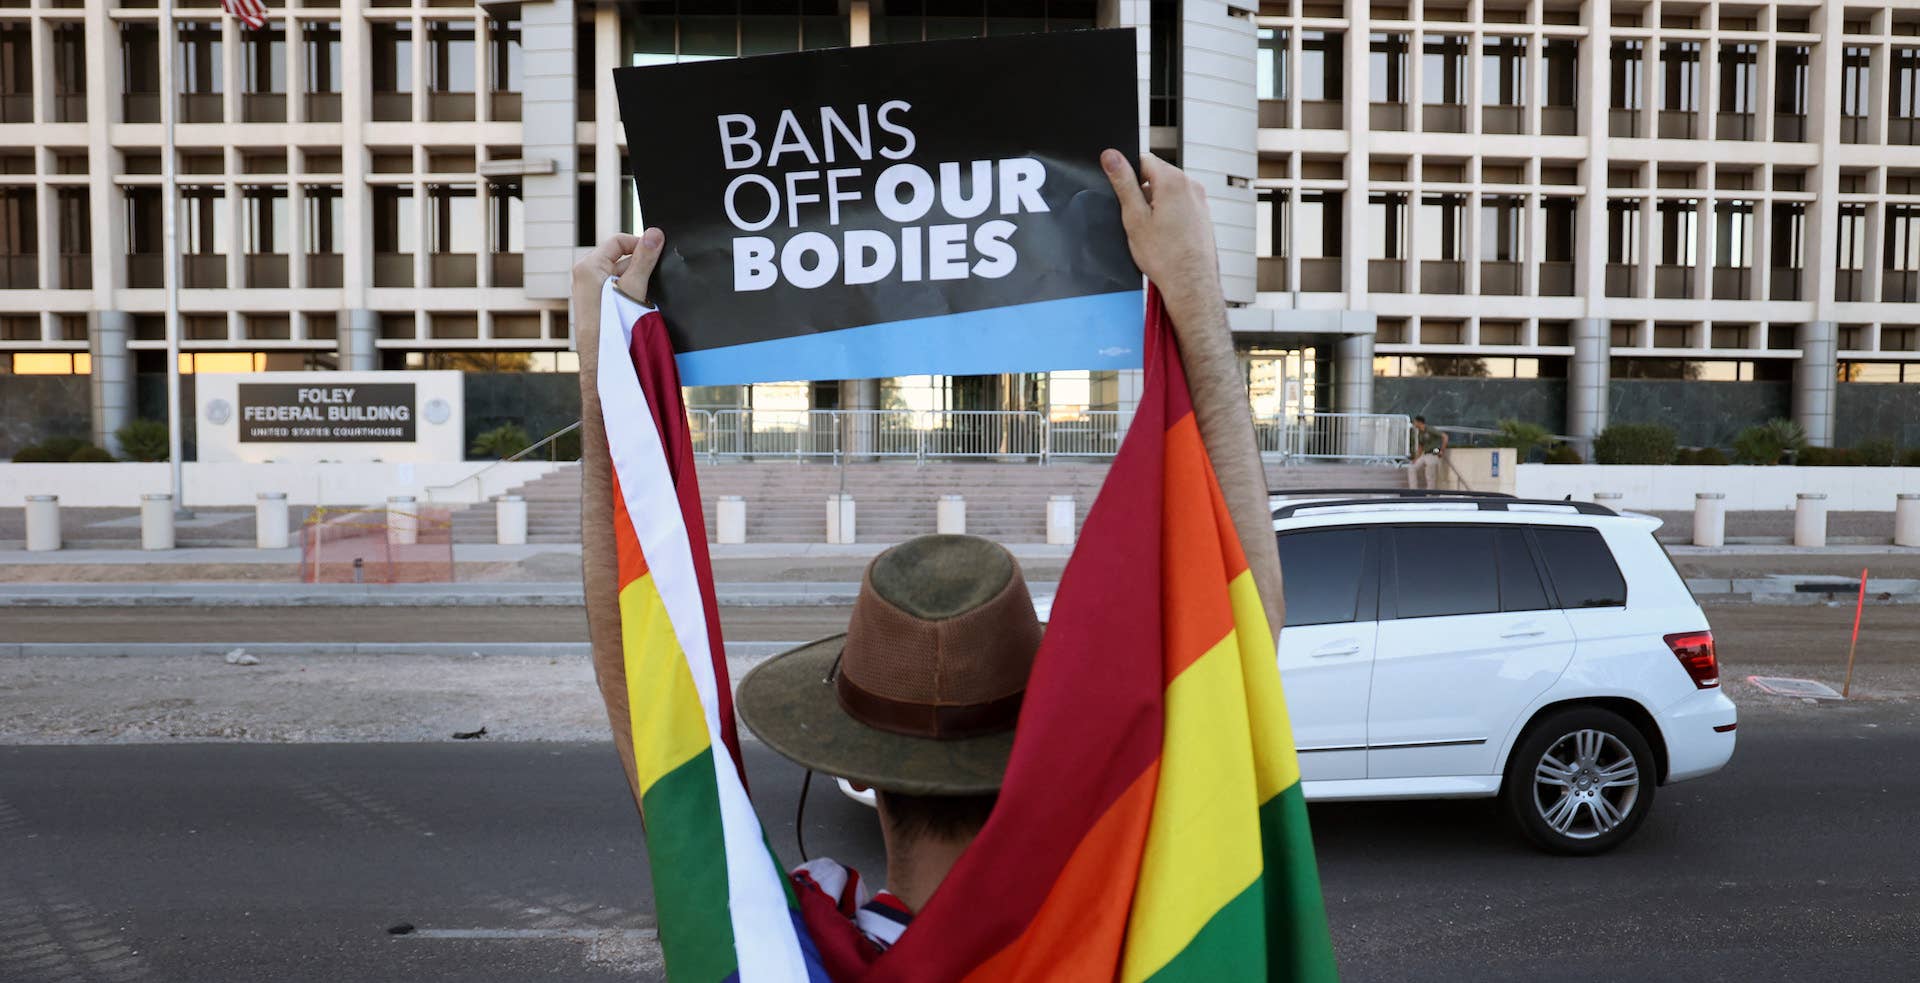 A man protests LGBTQ rights outside of a courthouse